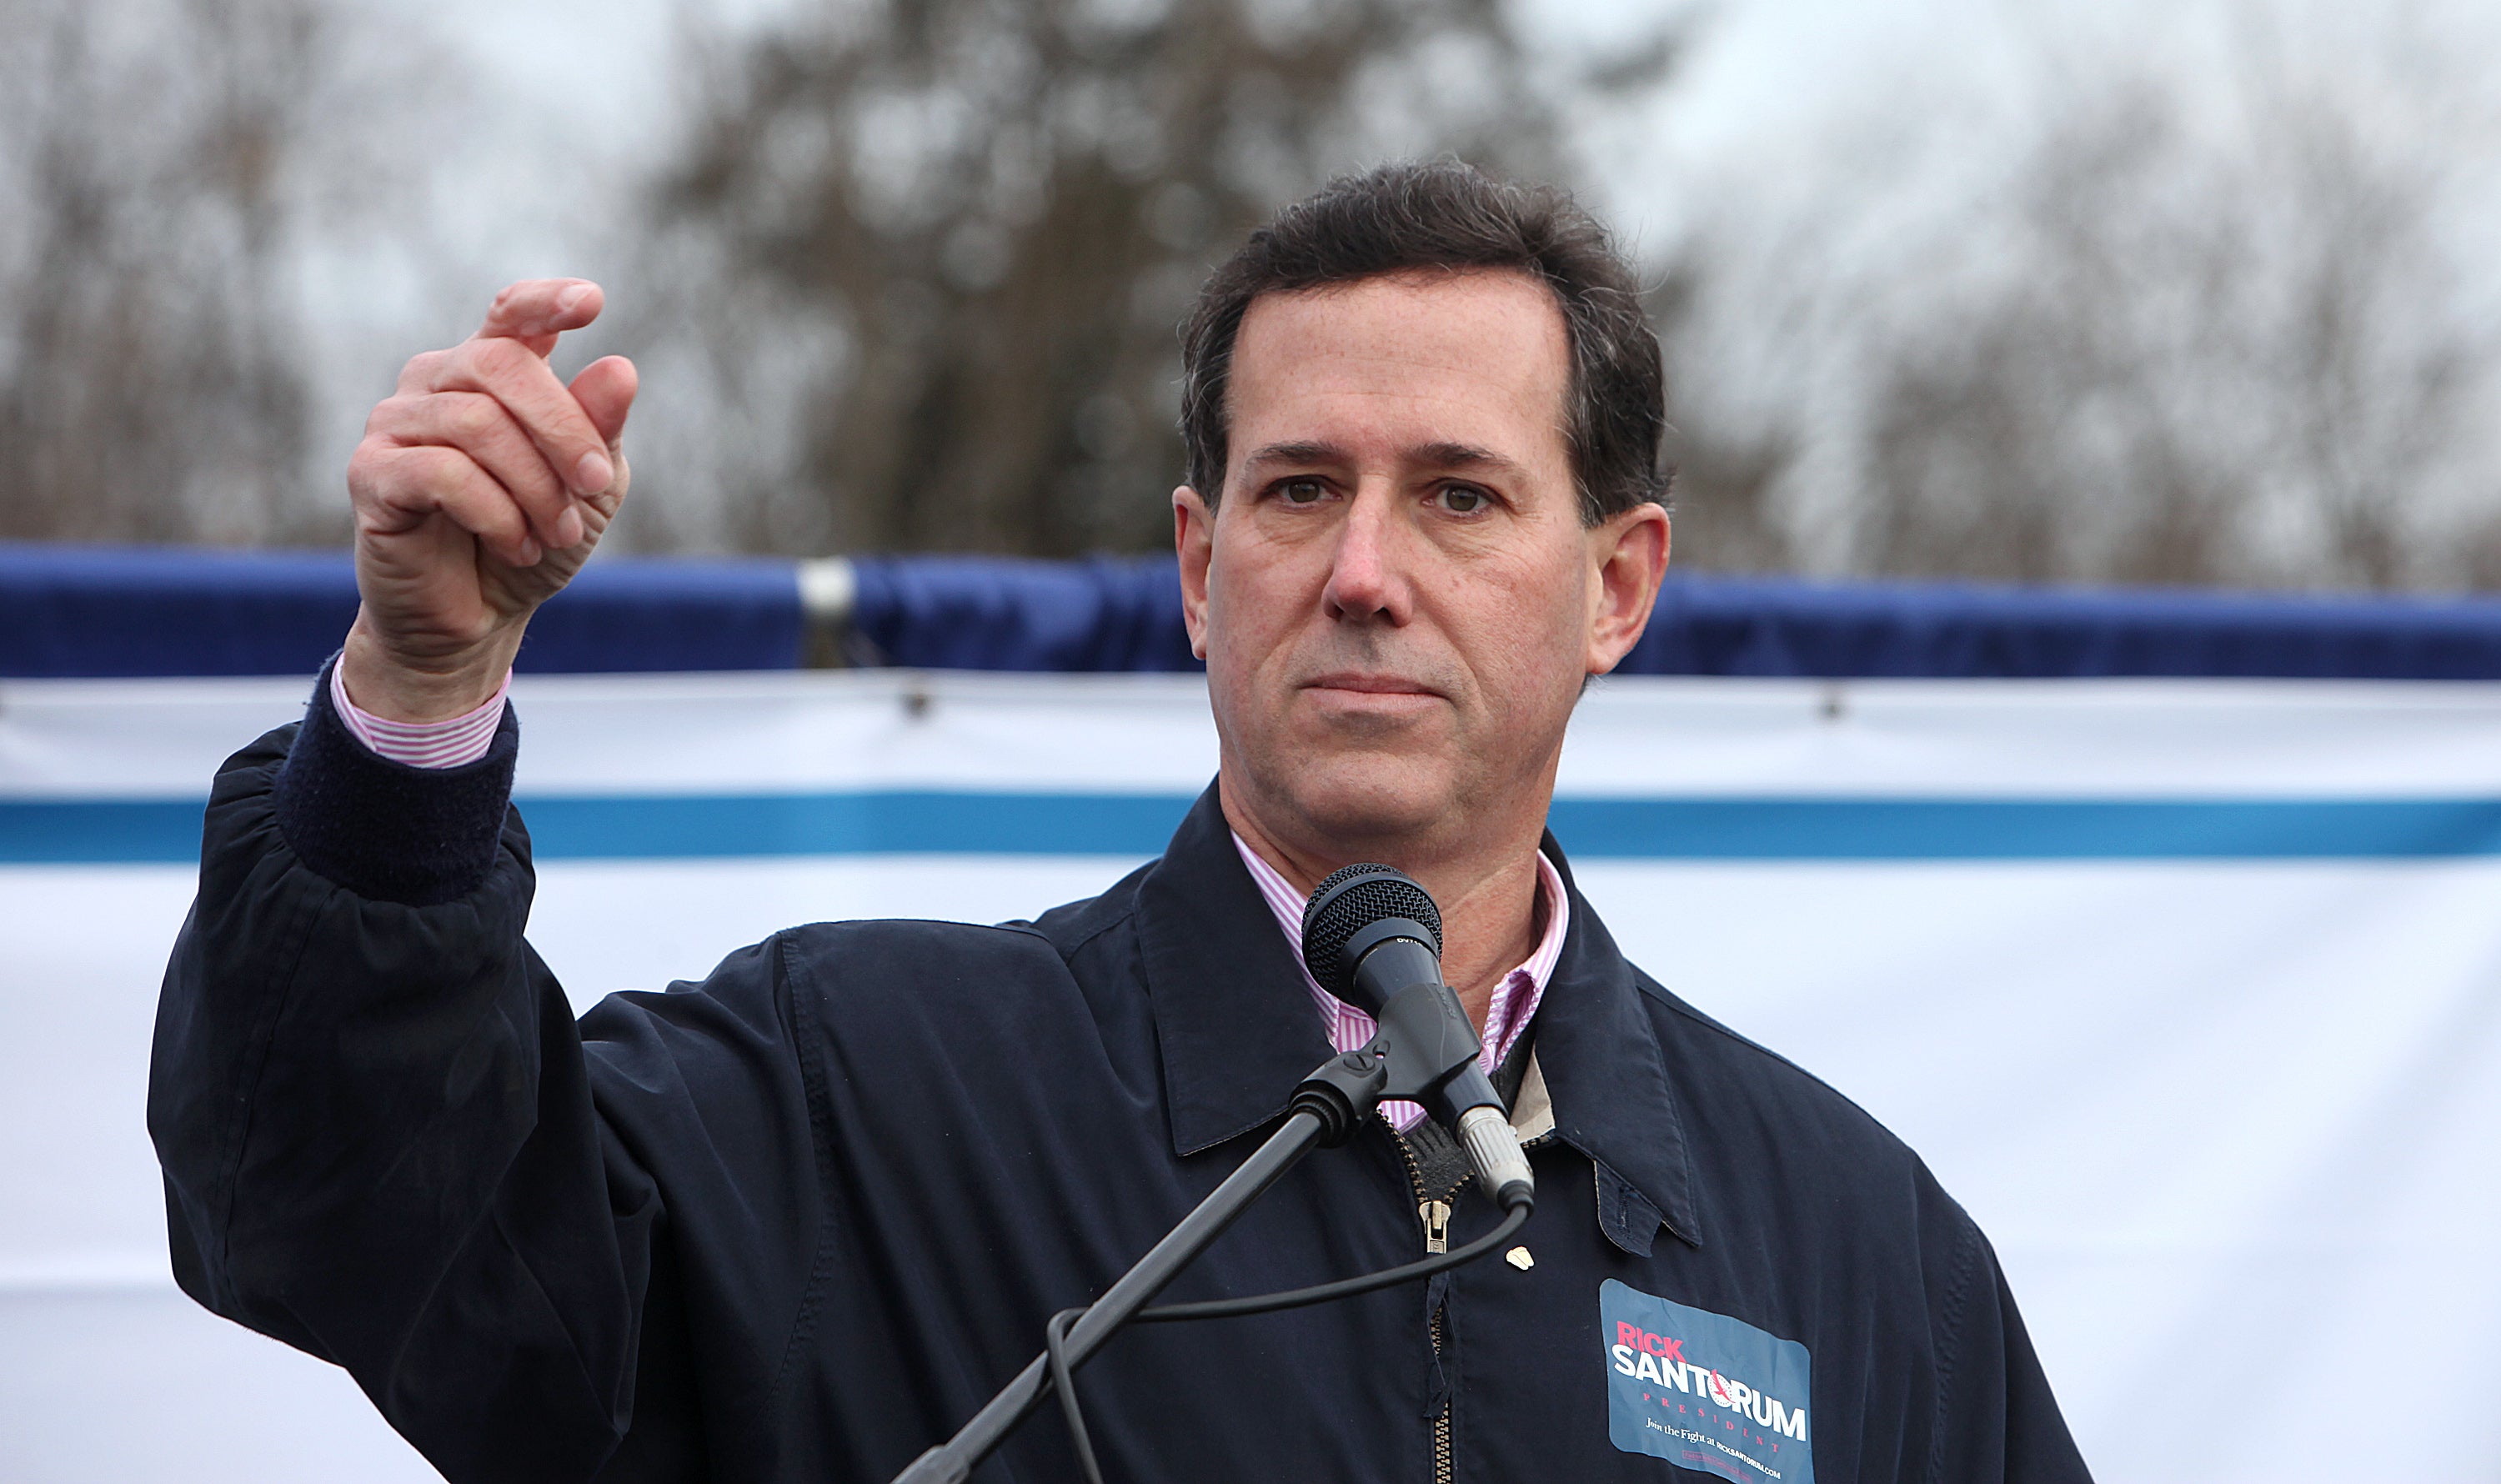 Rick Santorum, Keep Your Foot Out of Your Mouth